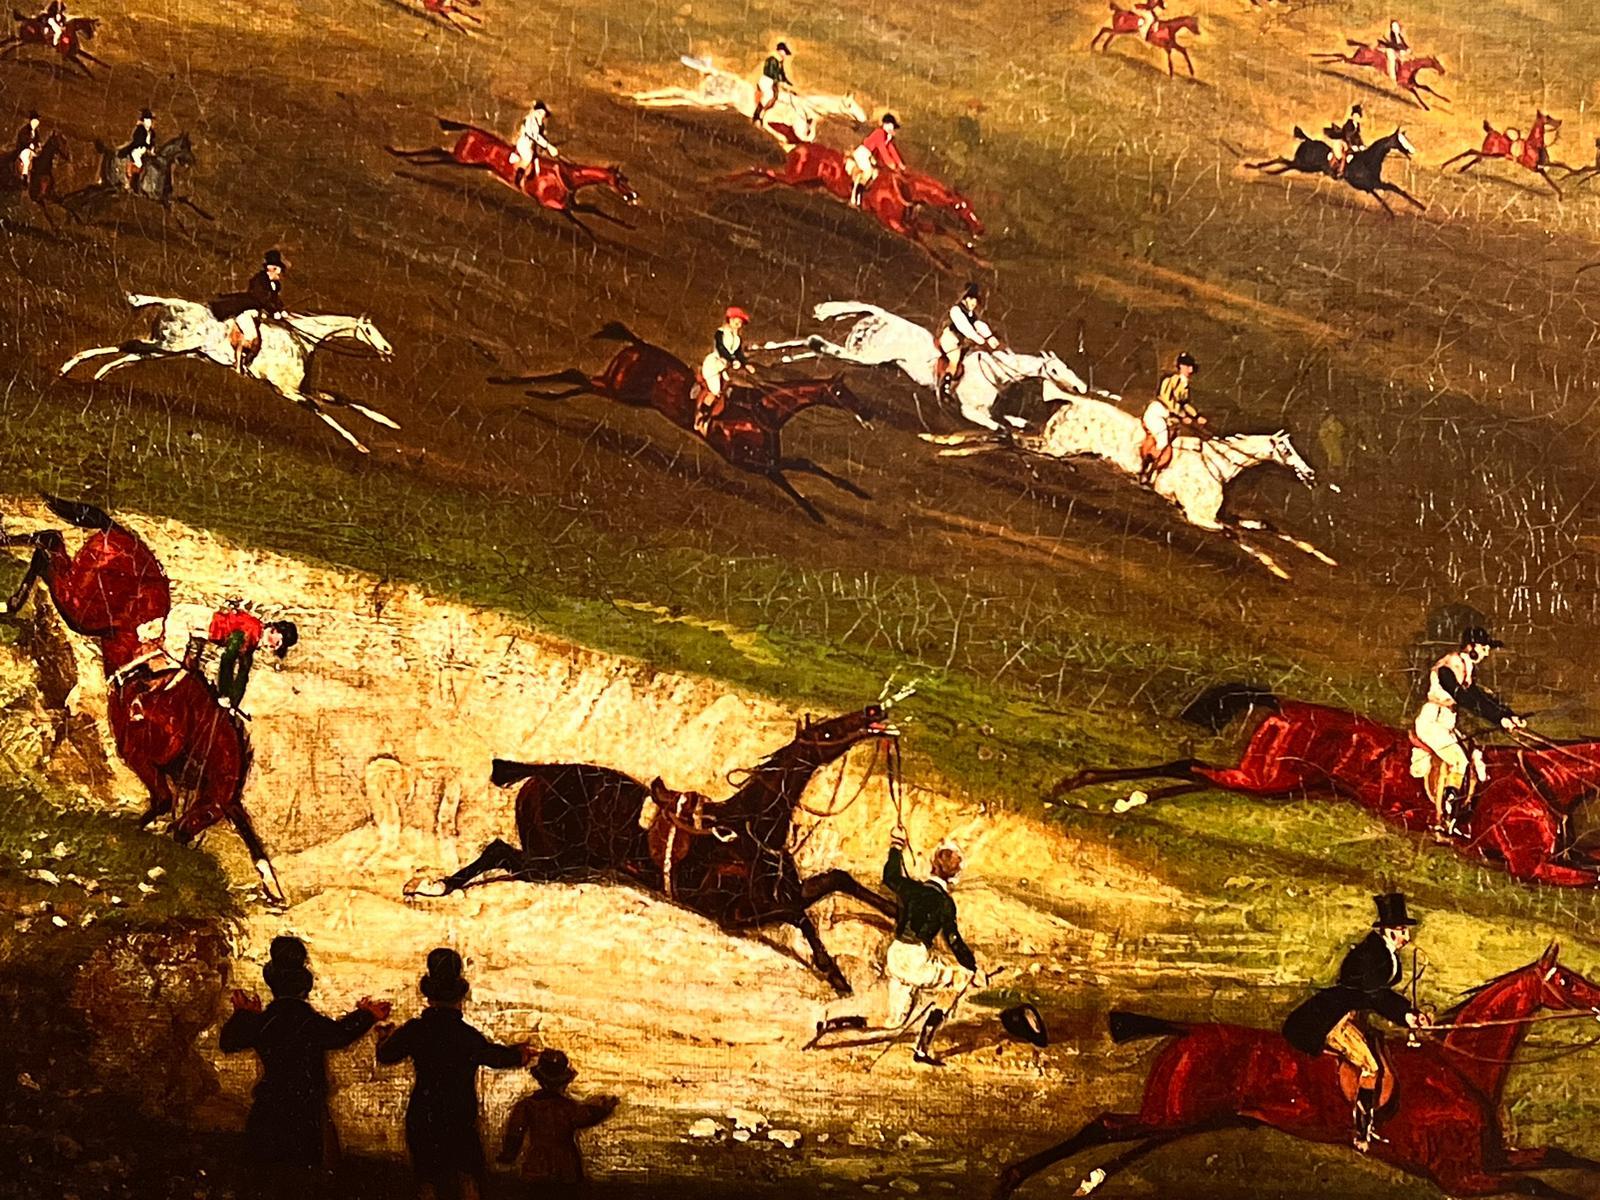 The Great St. Albans Steeplechase
after James Pollard
color print on canvas, framed
canvas: 25.5 x 37 inches
framed: 31 x 41 inches
the painting is in overall very good and sound condition - has small signs of paint loss and minor surface scuffs.